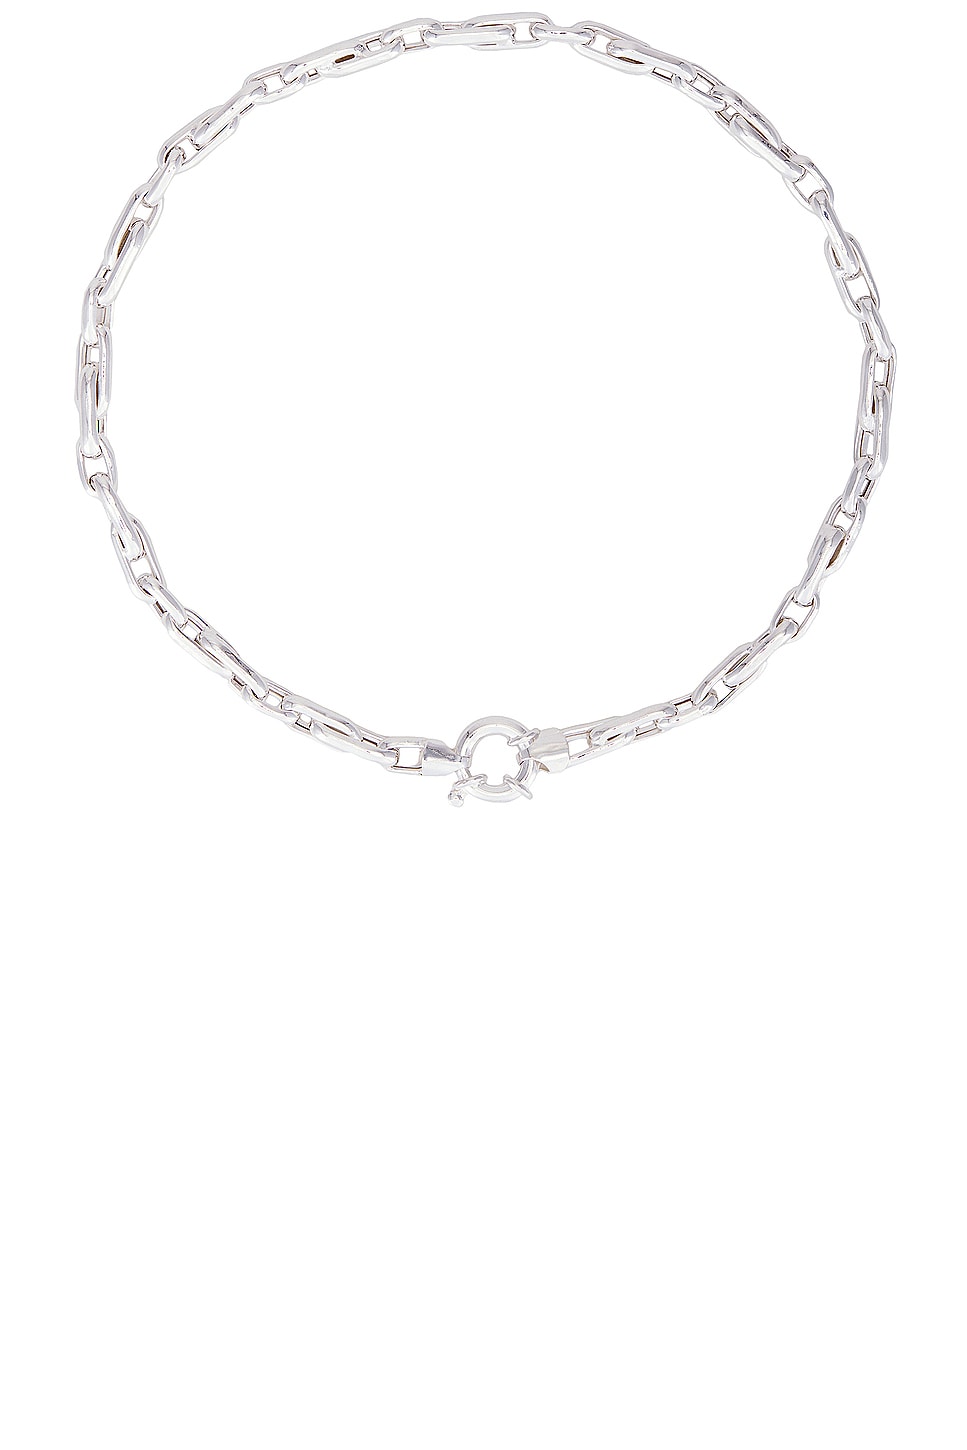 Image 1 of Loren Stewart Forza Chain Necklace in Sterling Silver